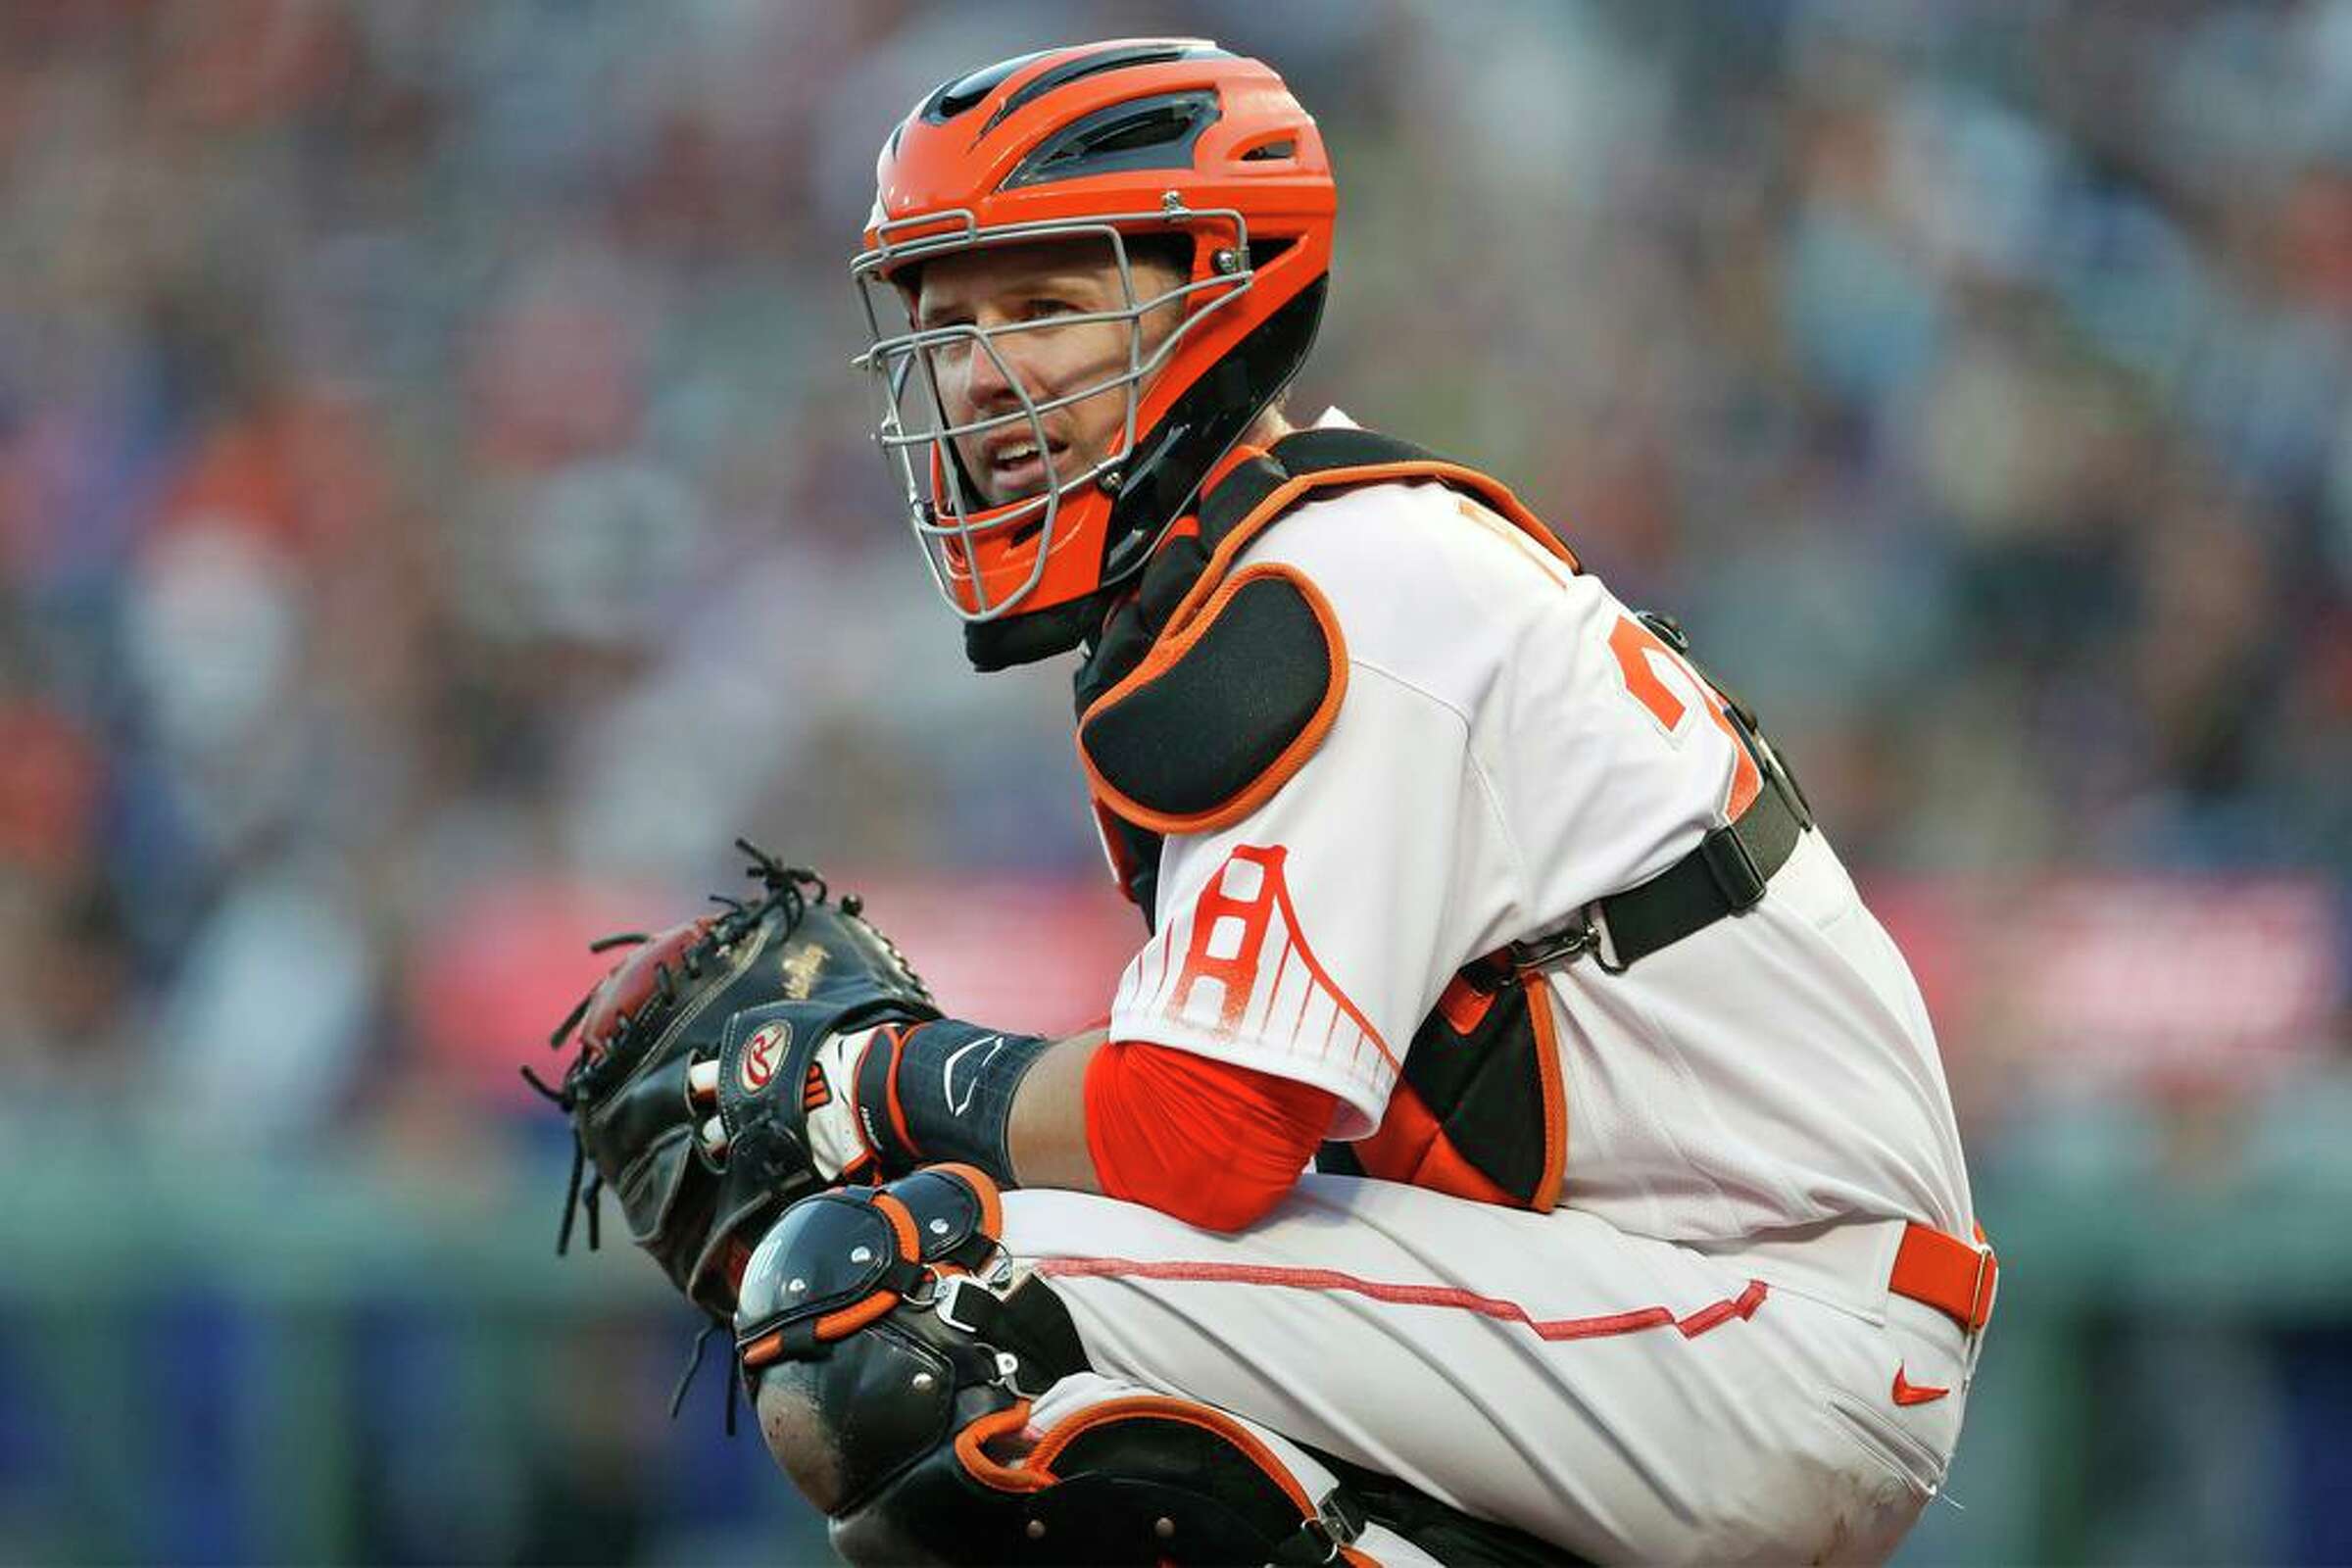 Buster Posey plans to retire, career with Giants is over